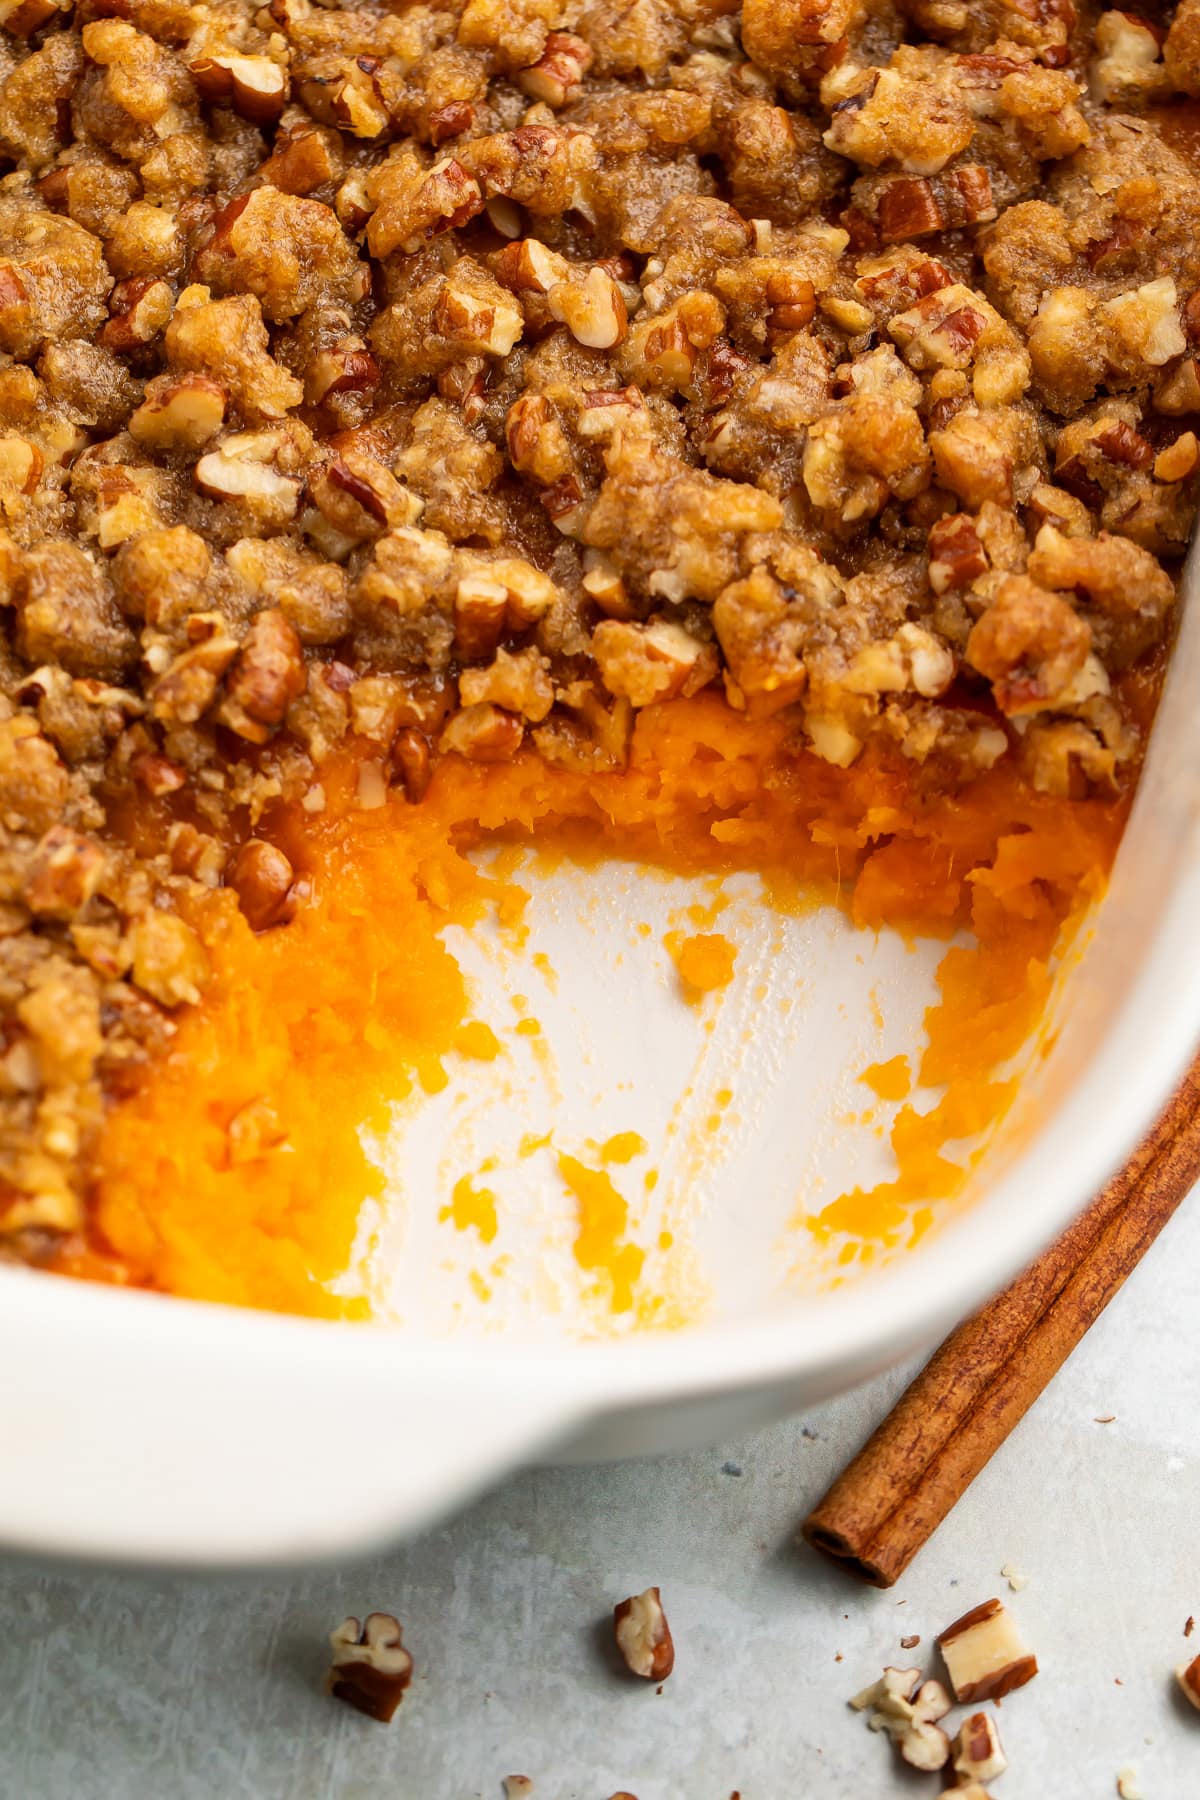 A casserole dish of Ruth's Chris sweet potato casserole topped with pecans and brown sugar, with a scoop of casserole missing from the corner of the dish.